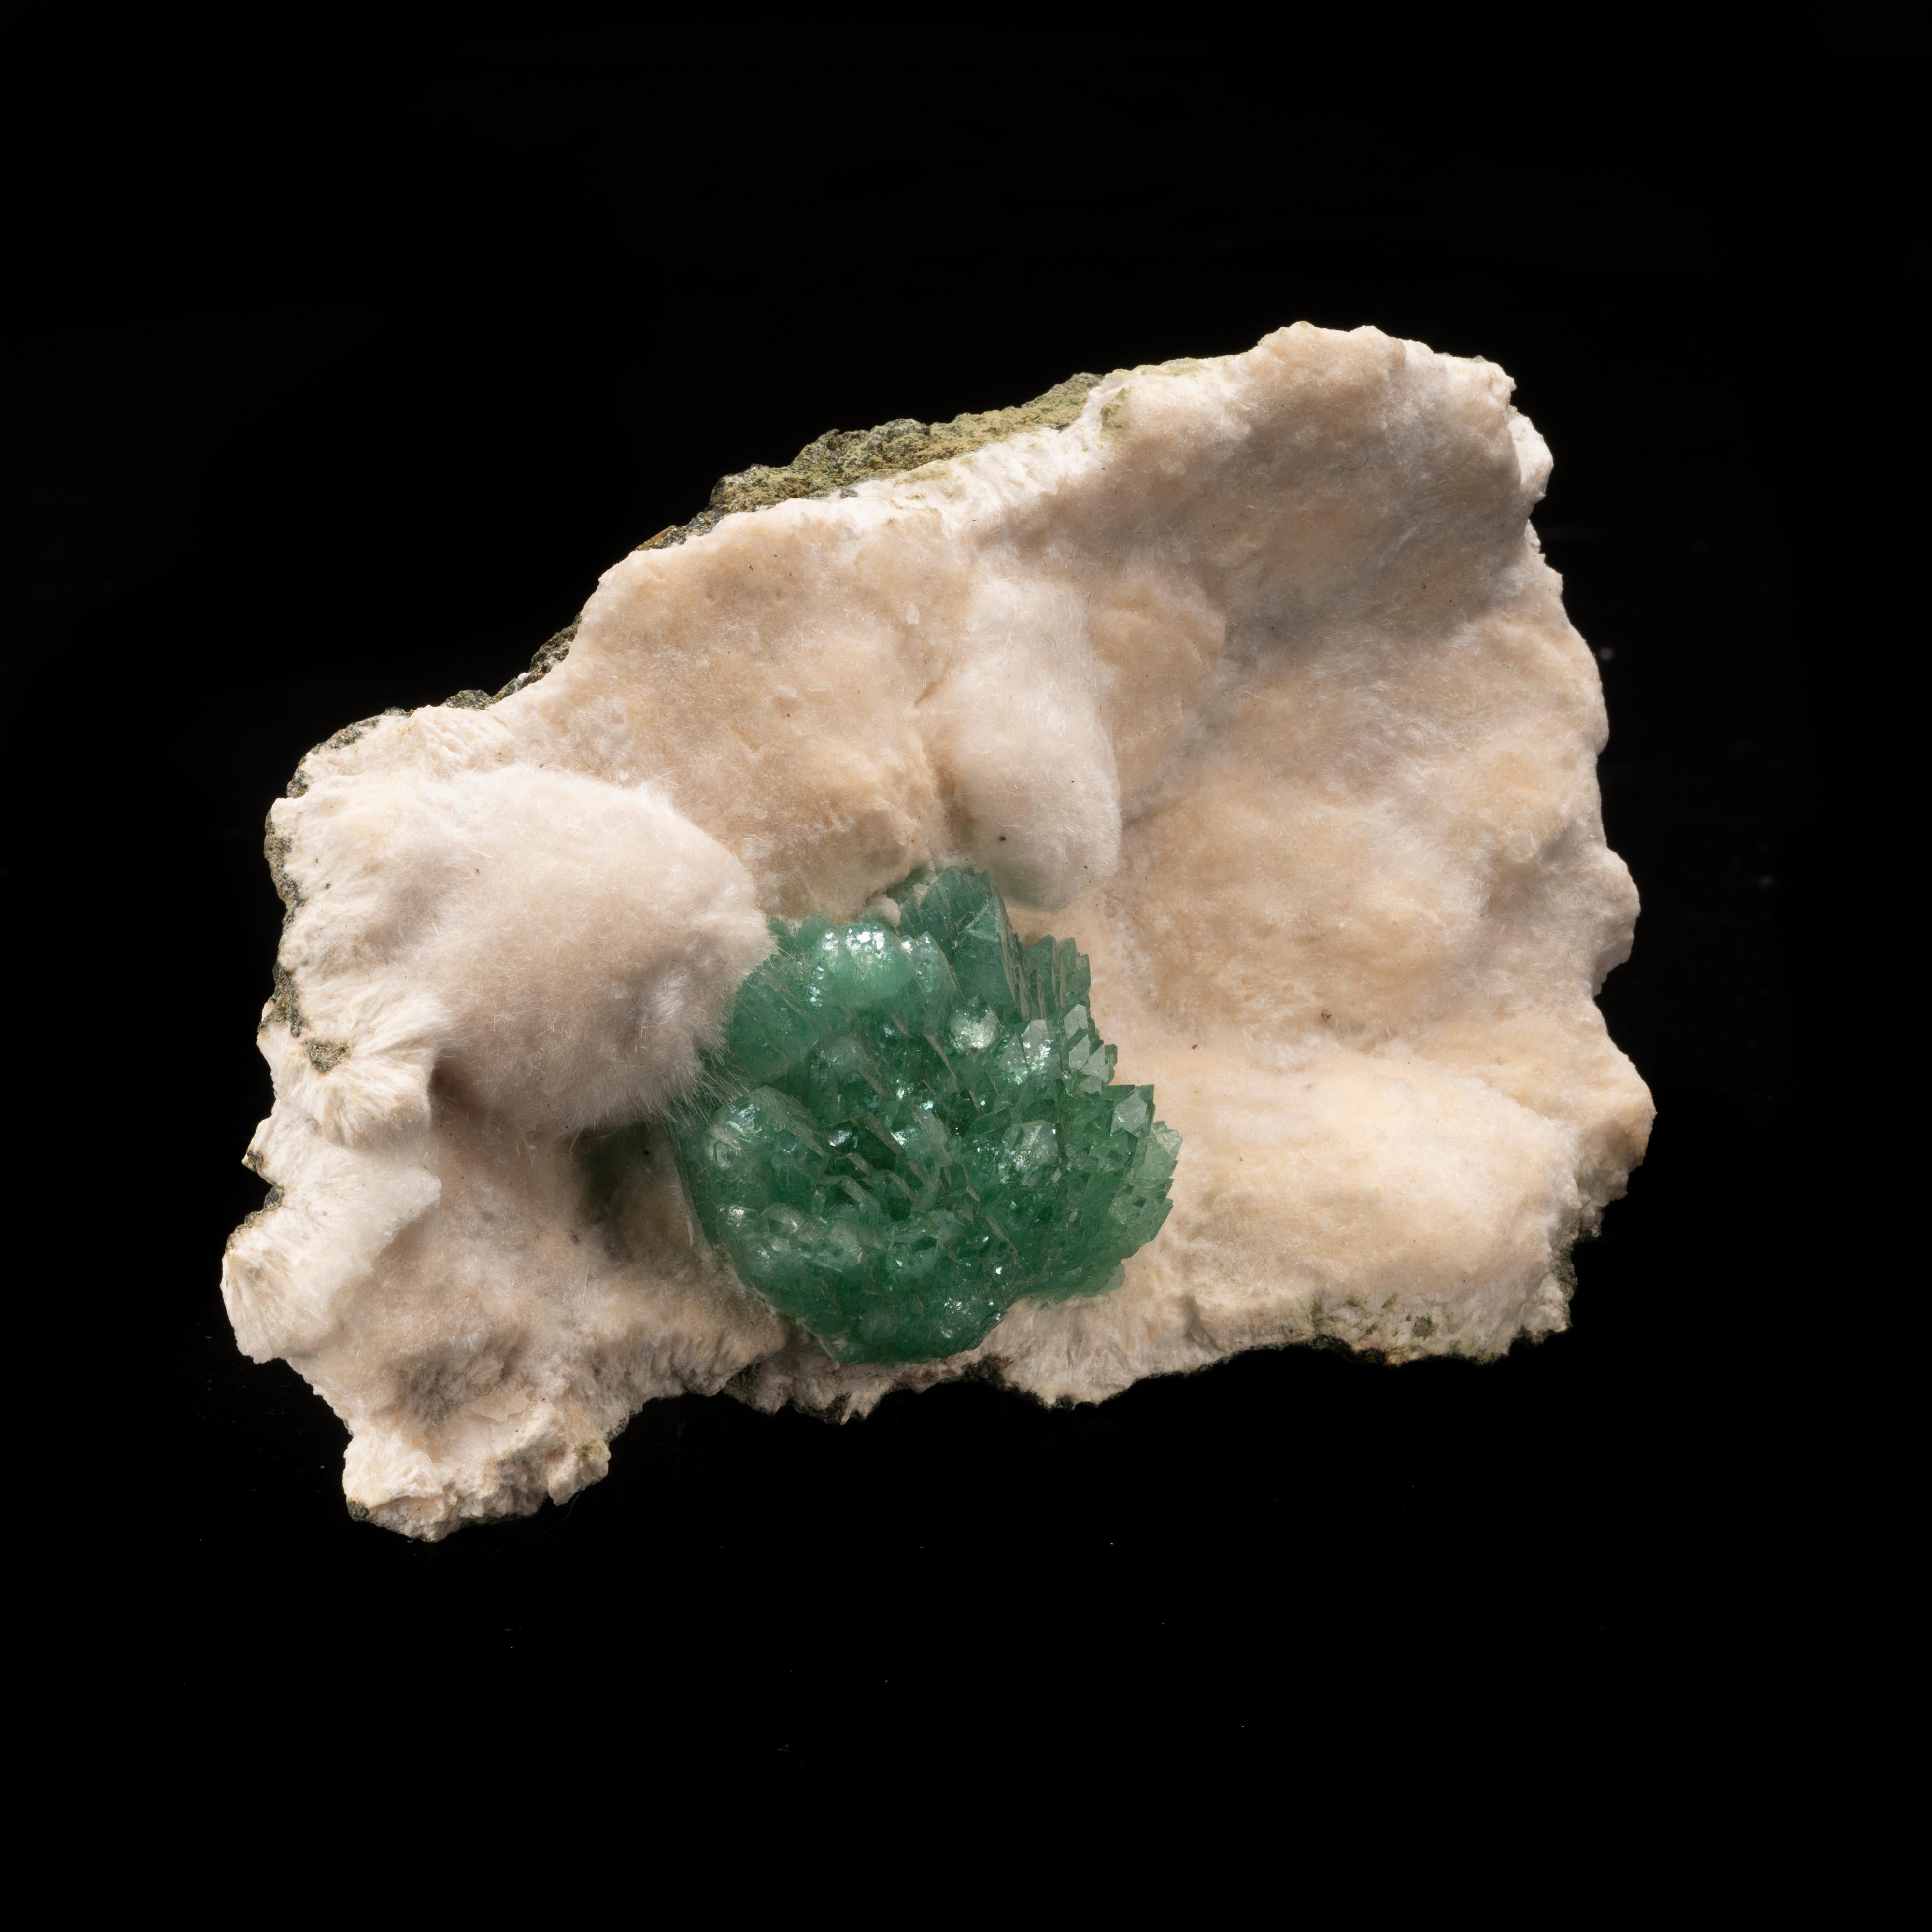 This strikingly arranged cluster of deep, deep green apophyllite has great natural presentation on a soft, lustrous bed of okenite, a rare mineral often associated with zeolite minerals. Okenite has an acicular (needle-like) crystal habit. This